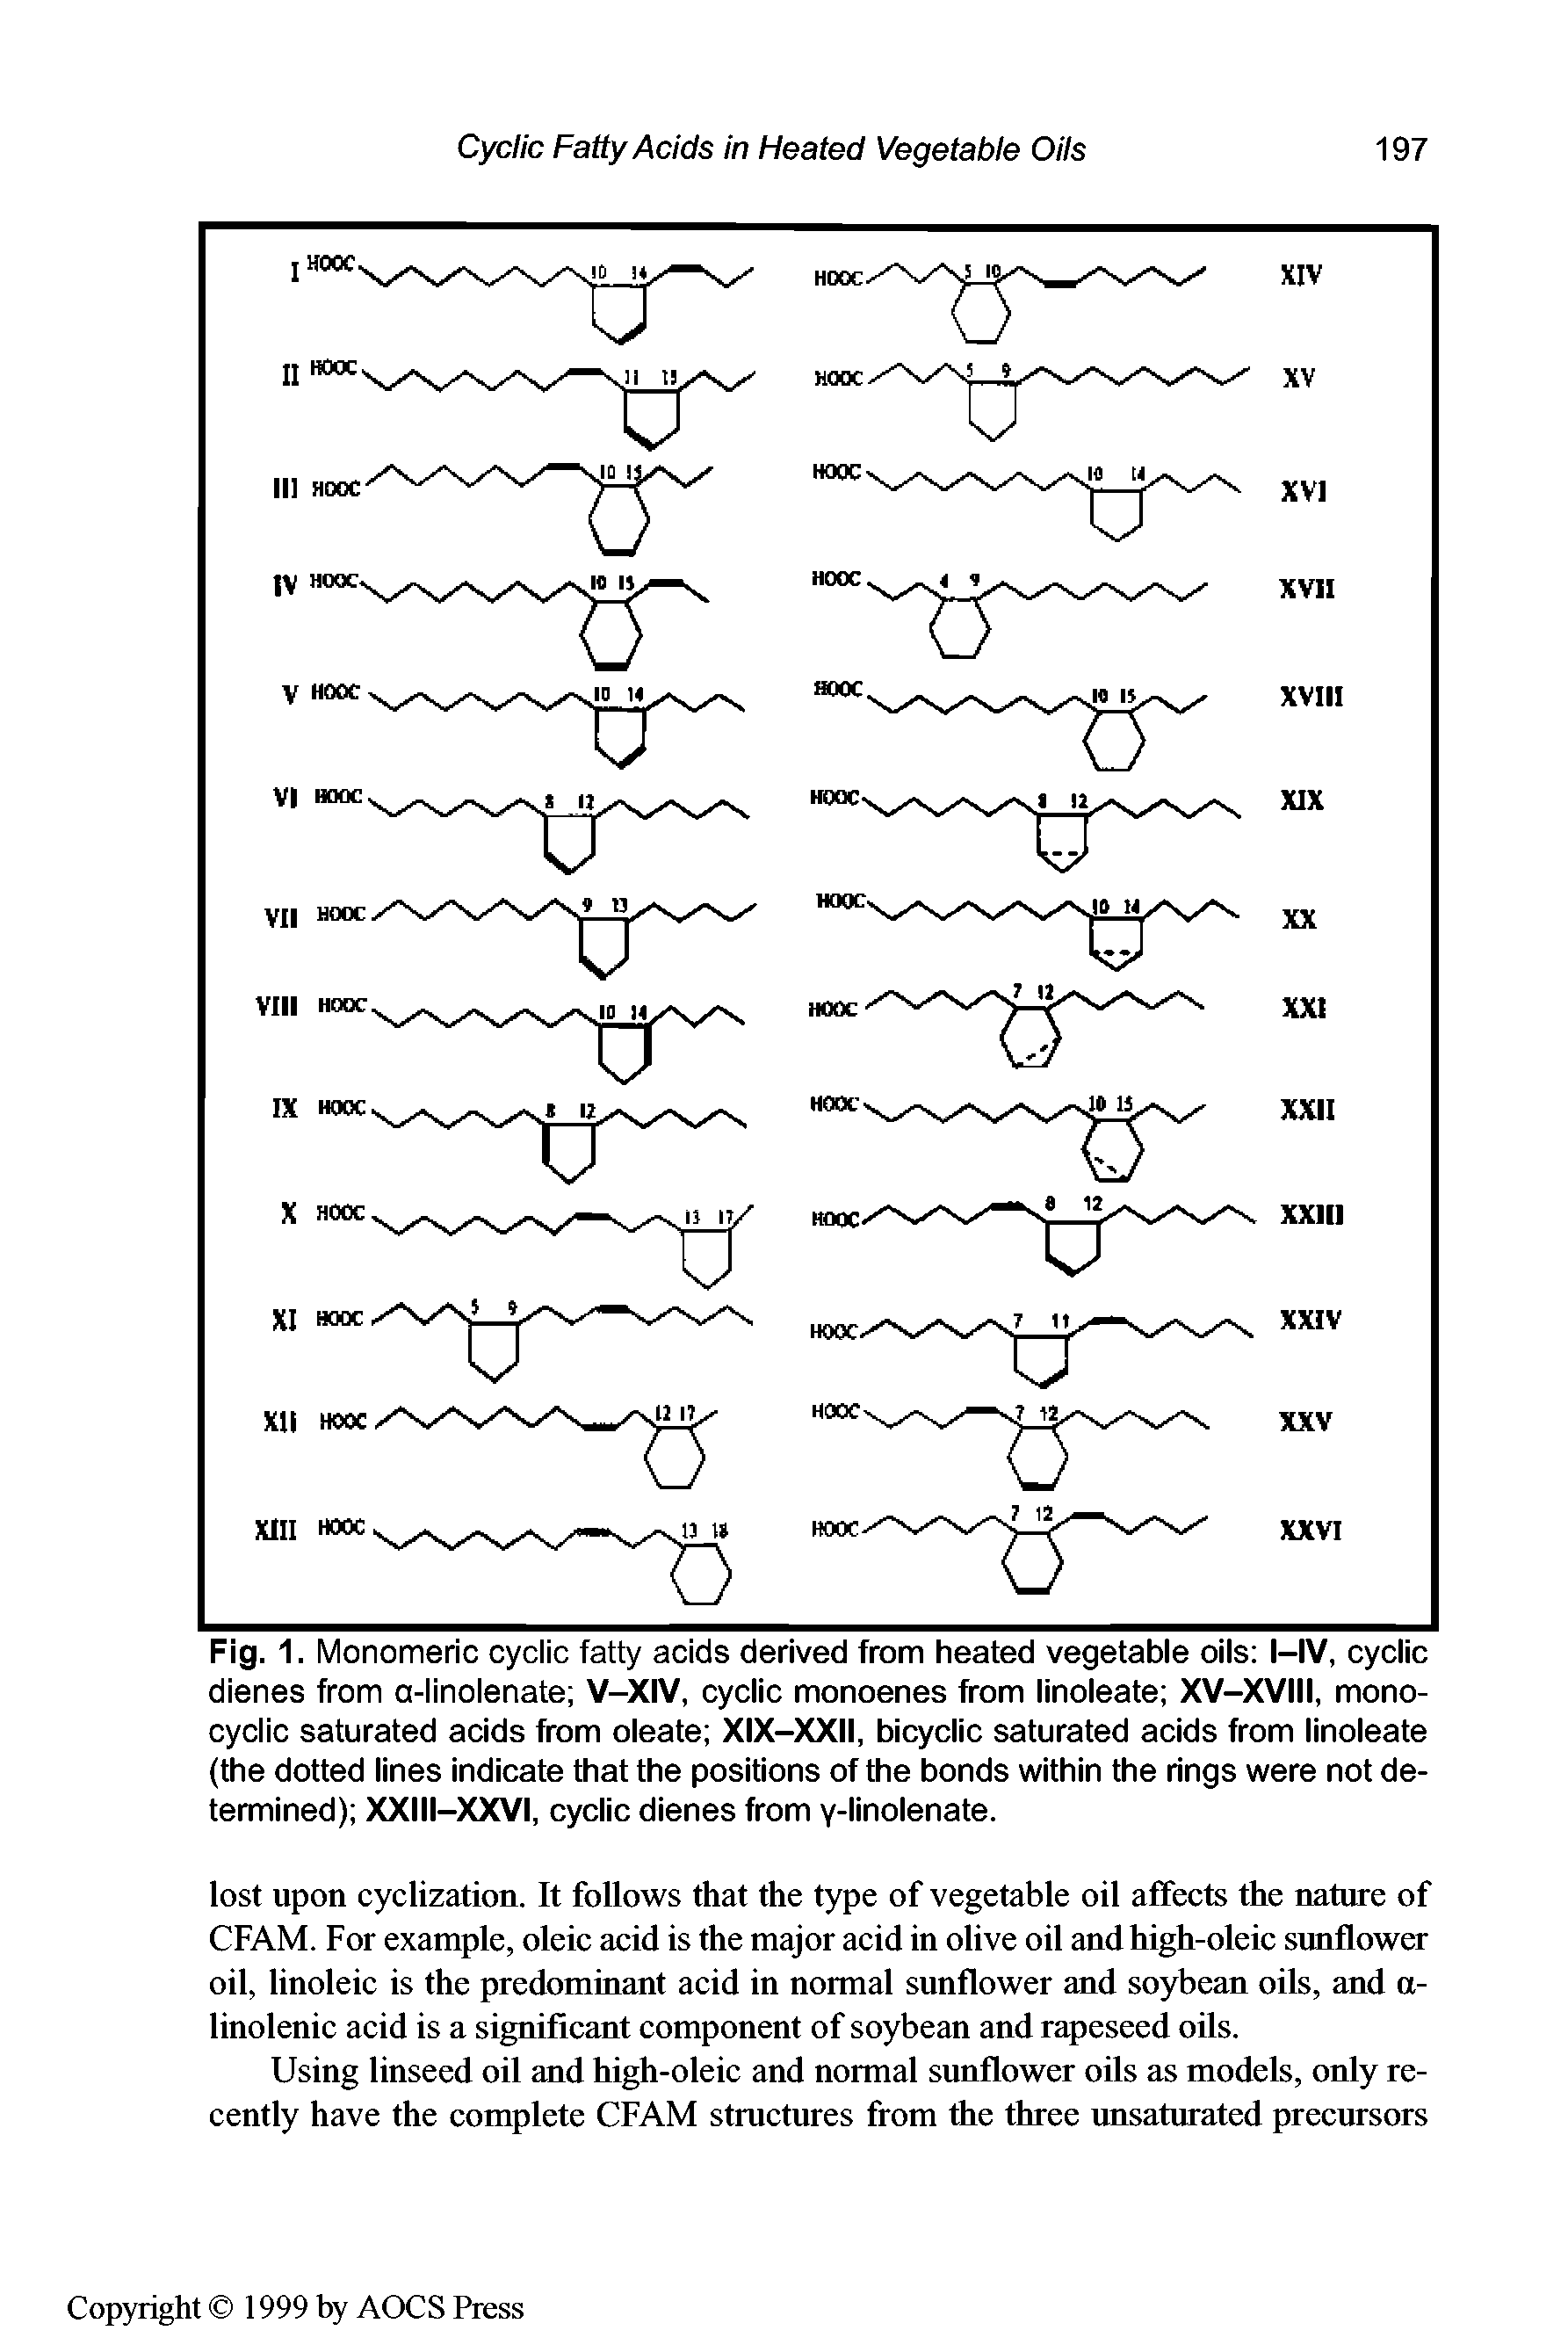 Fig.1. Monomeric cyclic fatty acids derived from heated vegetable oils l-IV, cyclic dienes from o-linolenate V-XIV, cyclic monoenes from linoleate XV-XVIll, mono-cyclic saturated acids from oleate XIX-XXII, bicyclic saturated acids from linoleate (the dotted lines indicate that the positions of the bonds within the rings were not determined) XXIII-XXVI, cyclic dienes from y-linolenate.